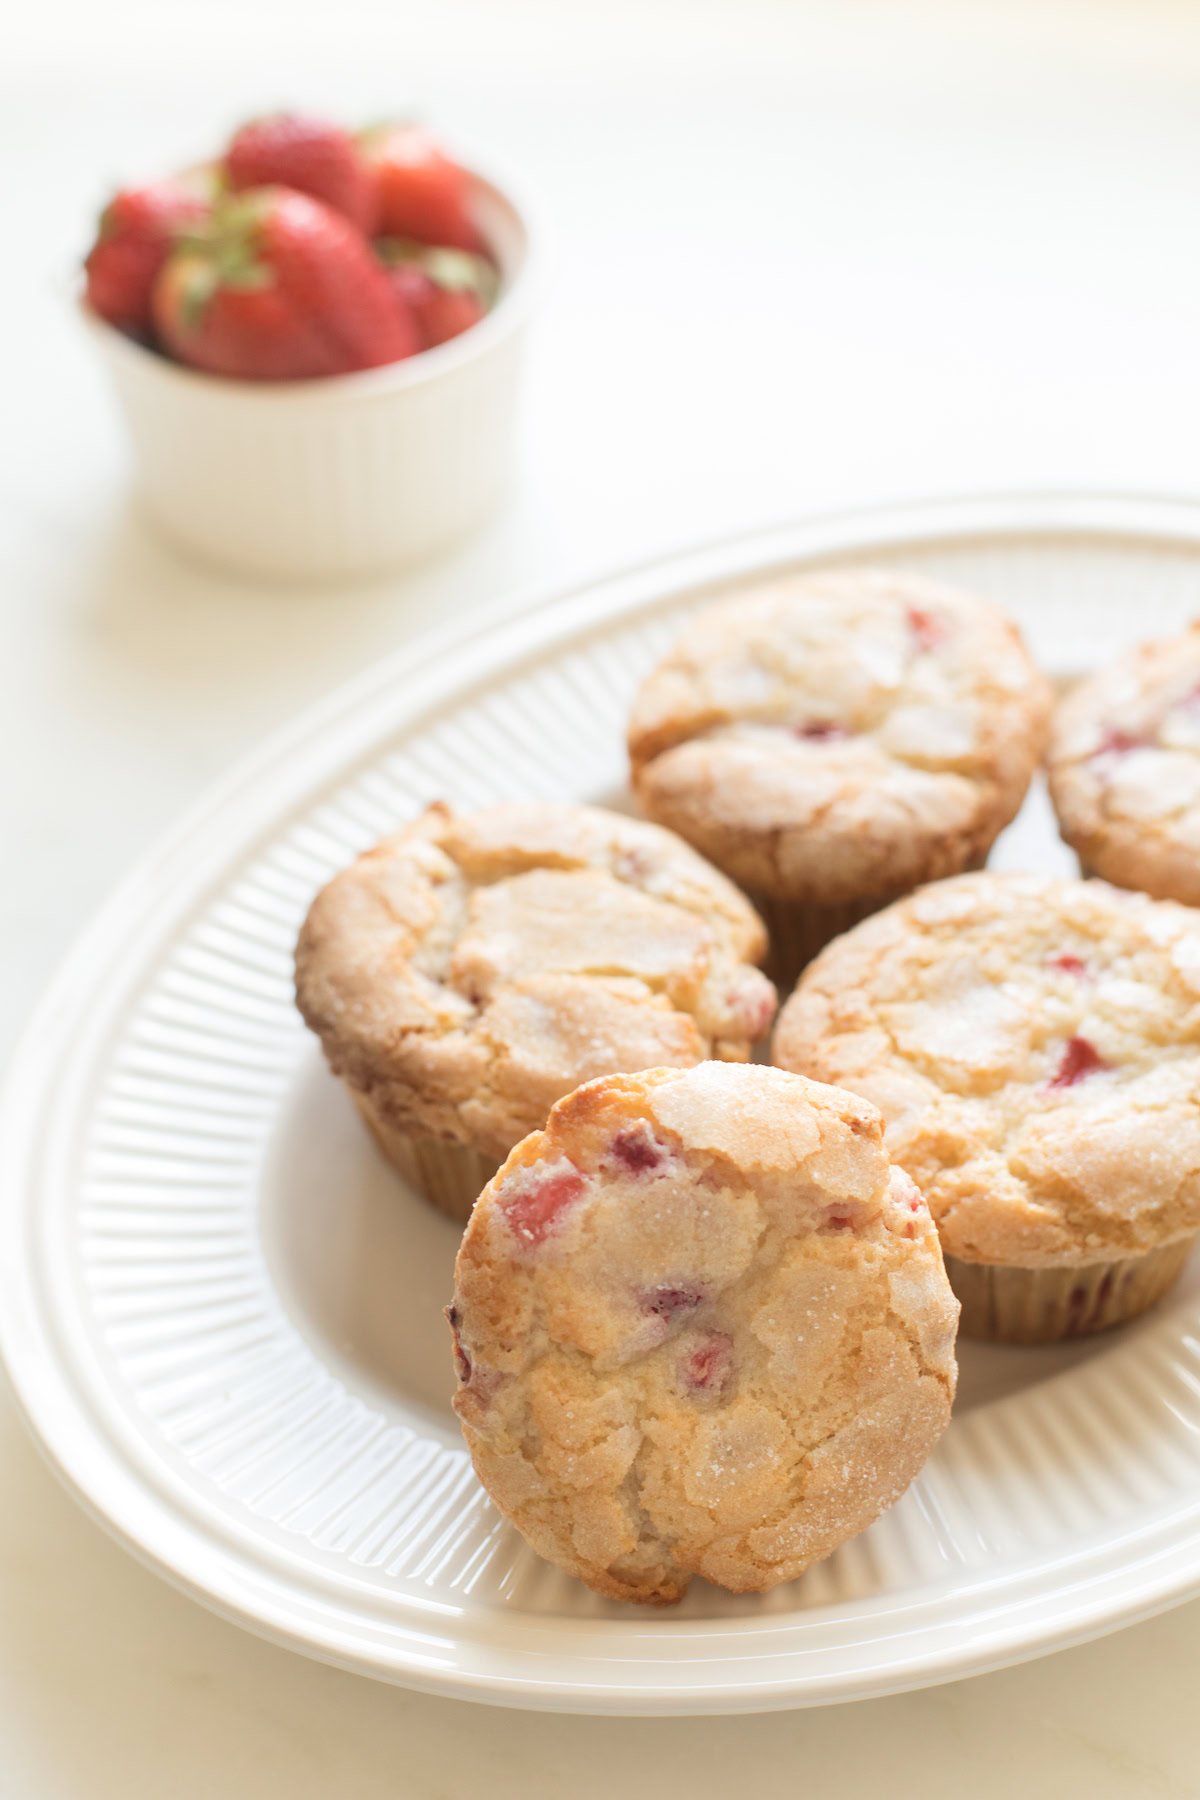 A plate with freshly baked strawberry muffins, one strawberry muffin prominently displayed in front, with a bowl of strawberries in the background.